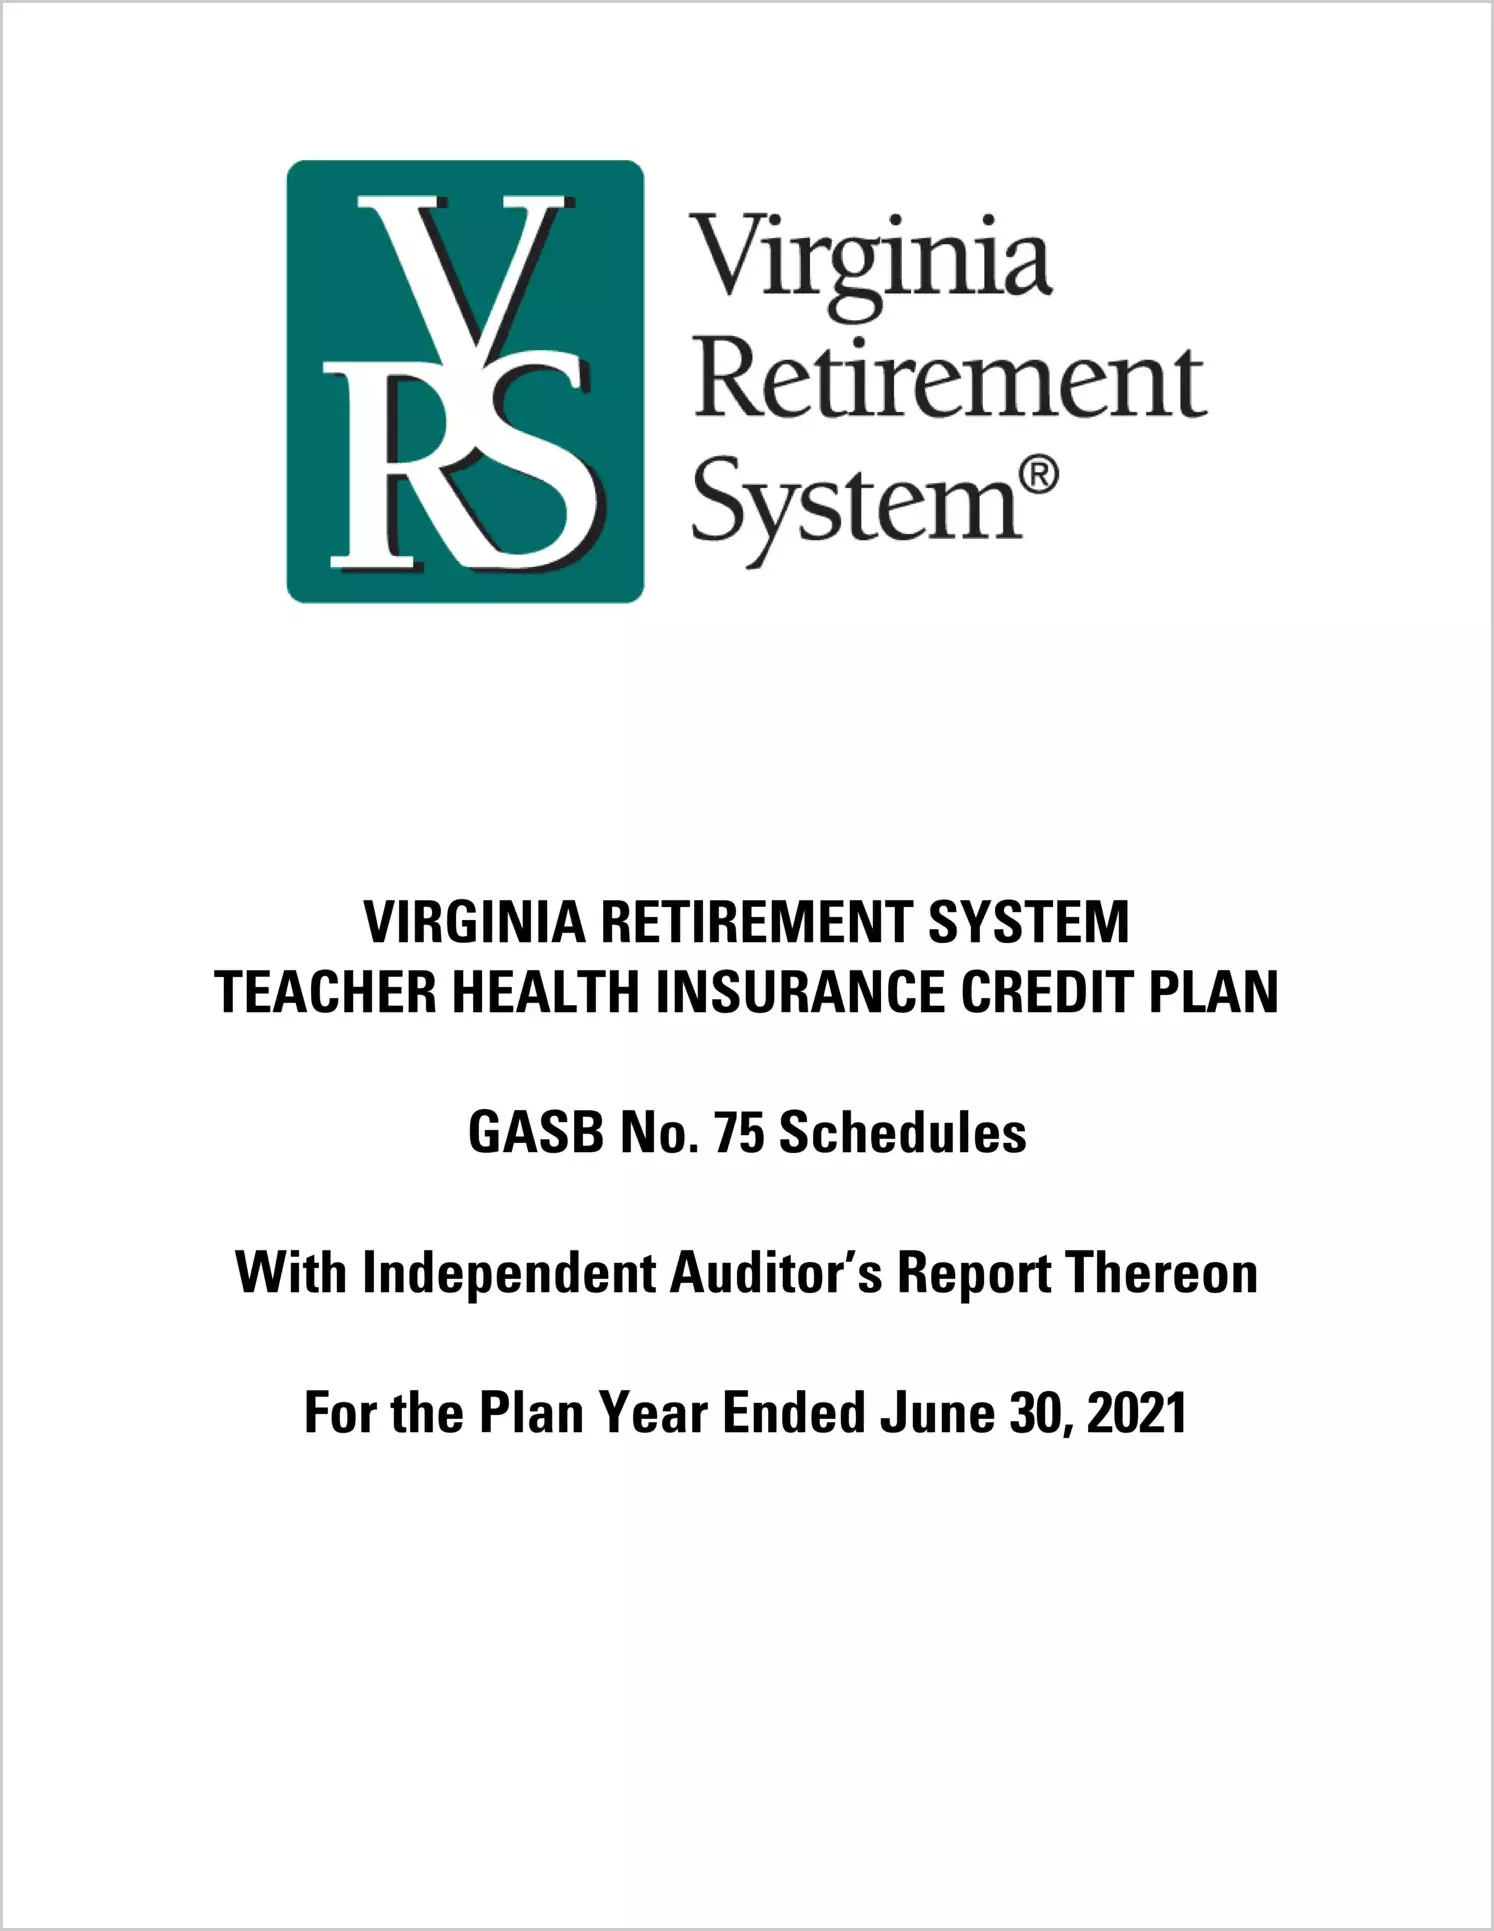 GASB 75 Schedules - Virginia Retirement System Teacher Health Insurance Credit Plan for the year ended June 30, 2021